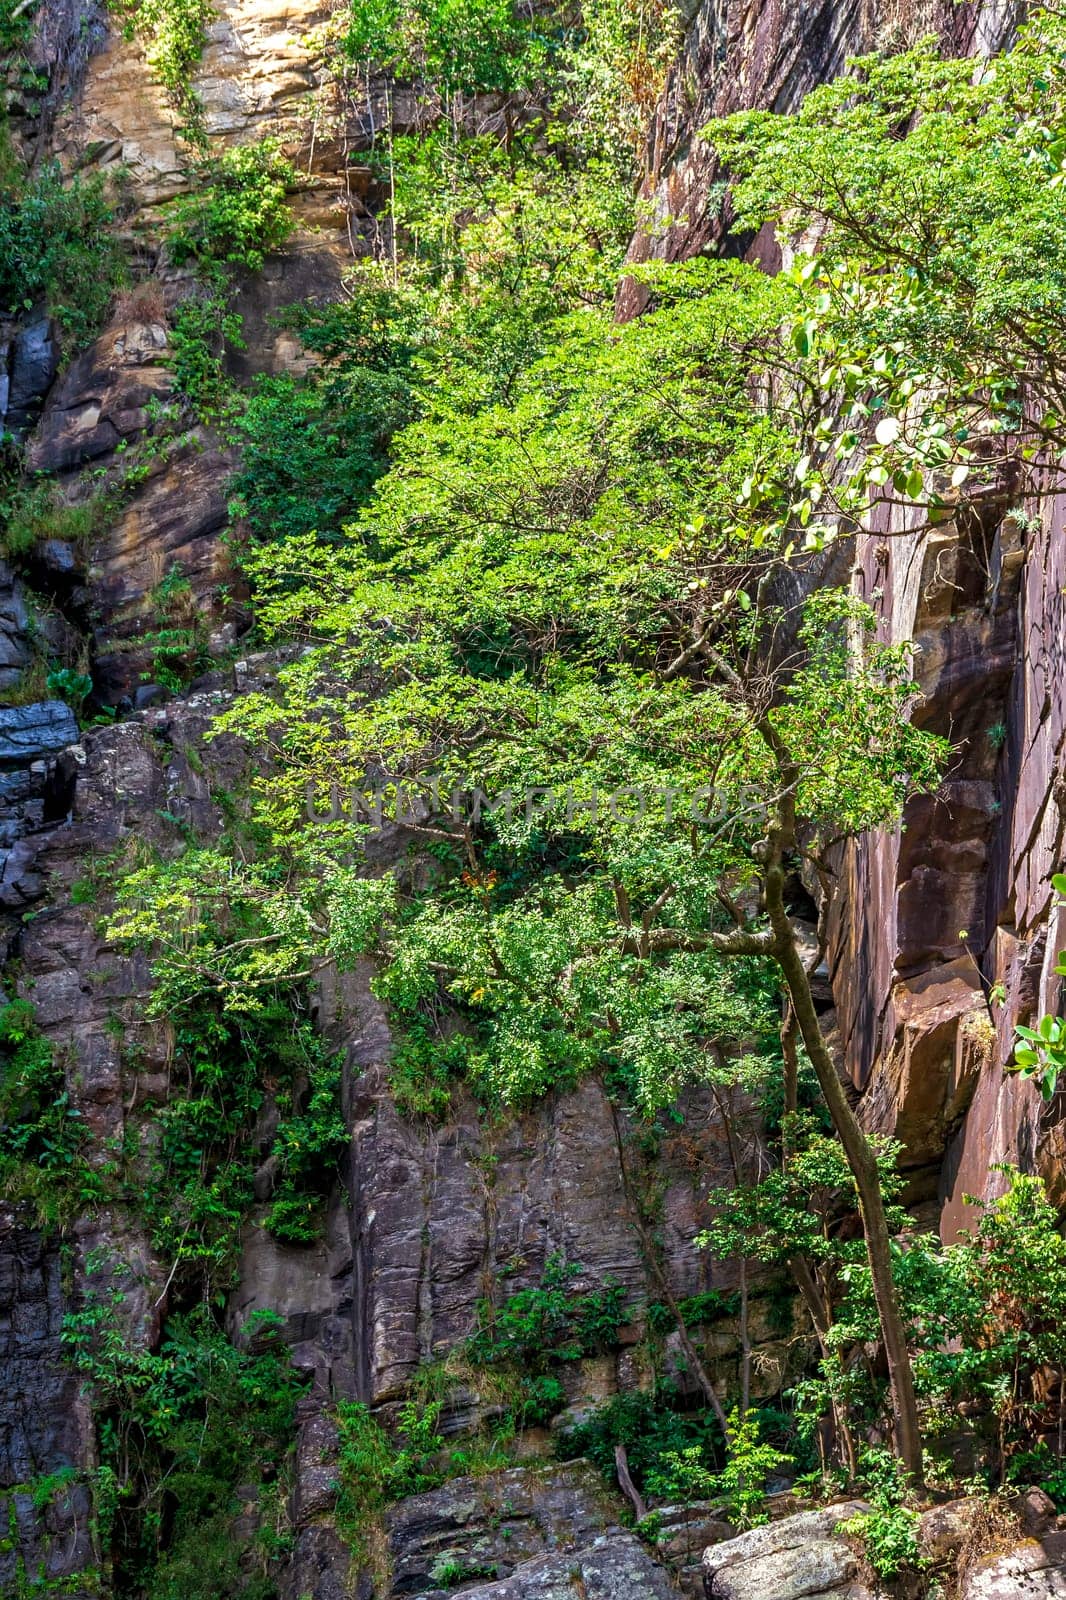 Forest vegetation blending with the rocks on a rocky slope in the Brazilian cerrado (savanna) biome region in the Serra do Cipo in the state of Minas Gerais